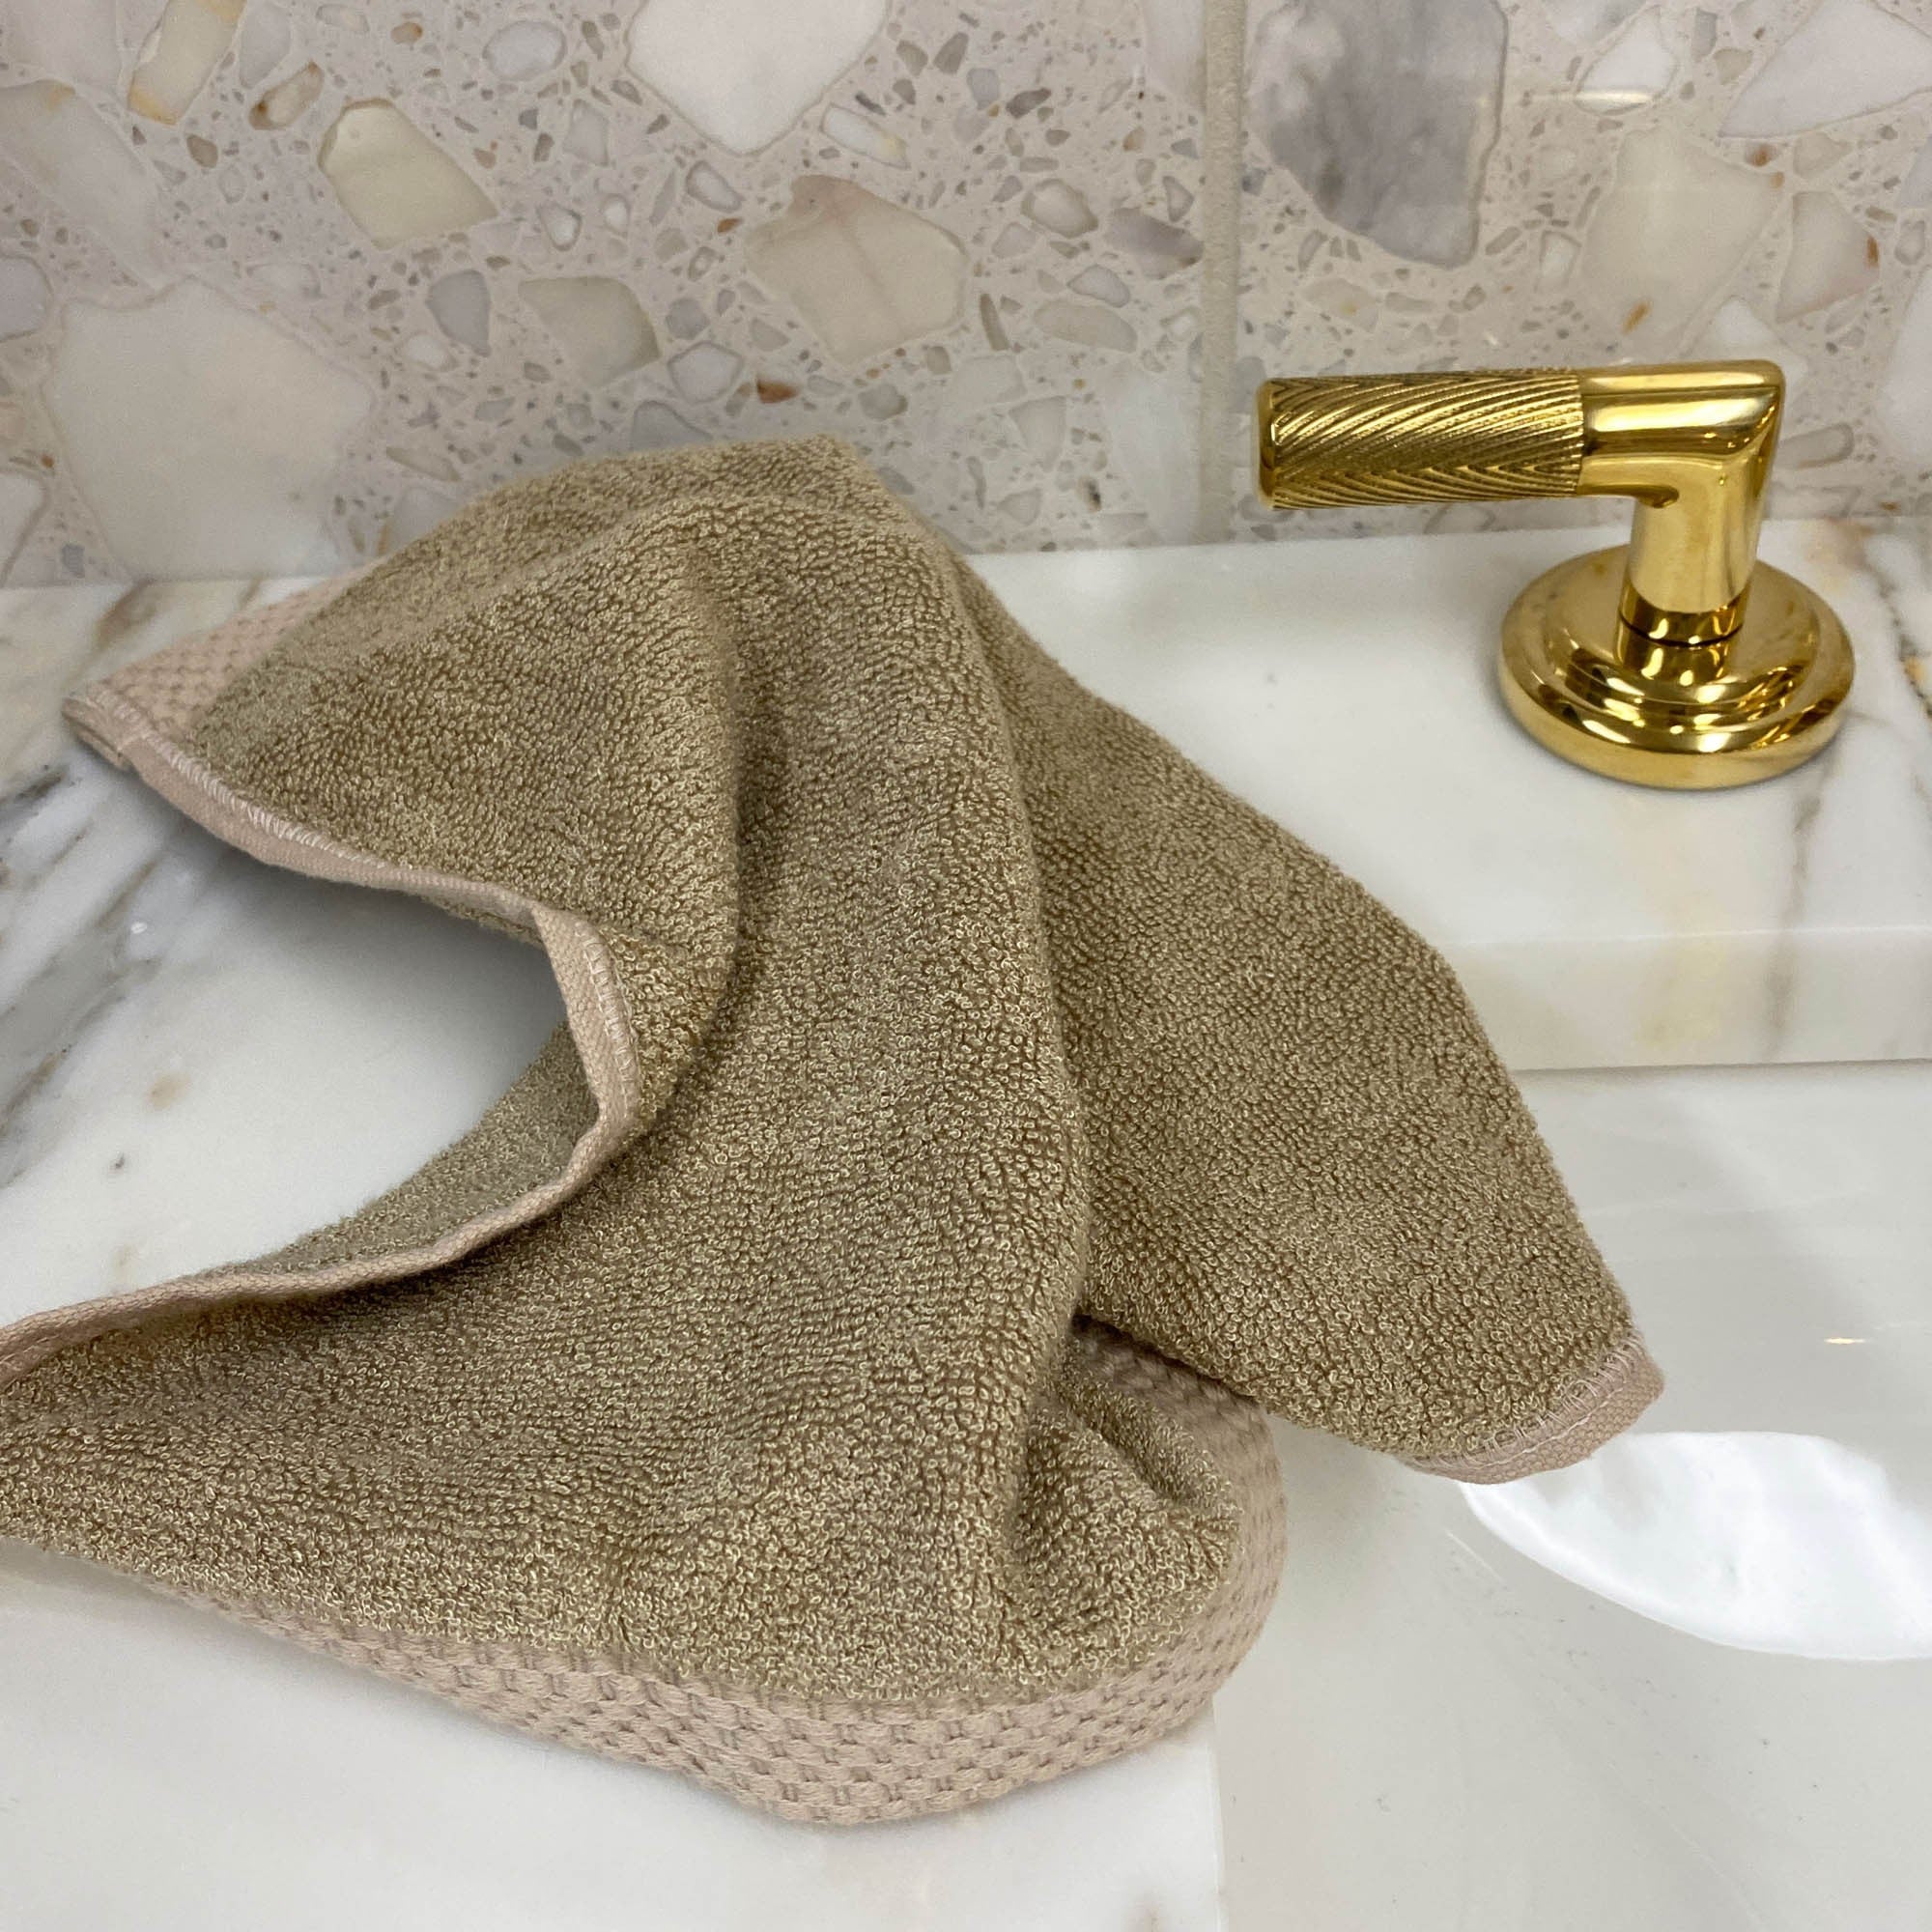 Luxury BAMBOO Bath Towel - Dry Off Quickly 3x's more Absorbent Towel, Hypoallergenic and Extra Gentle on Sensitive Skin - Champagne